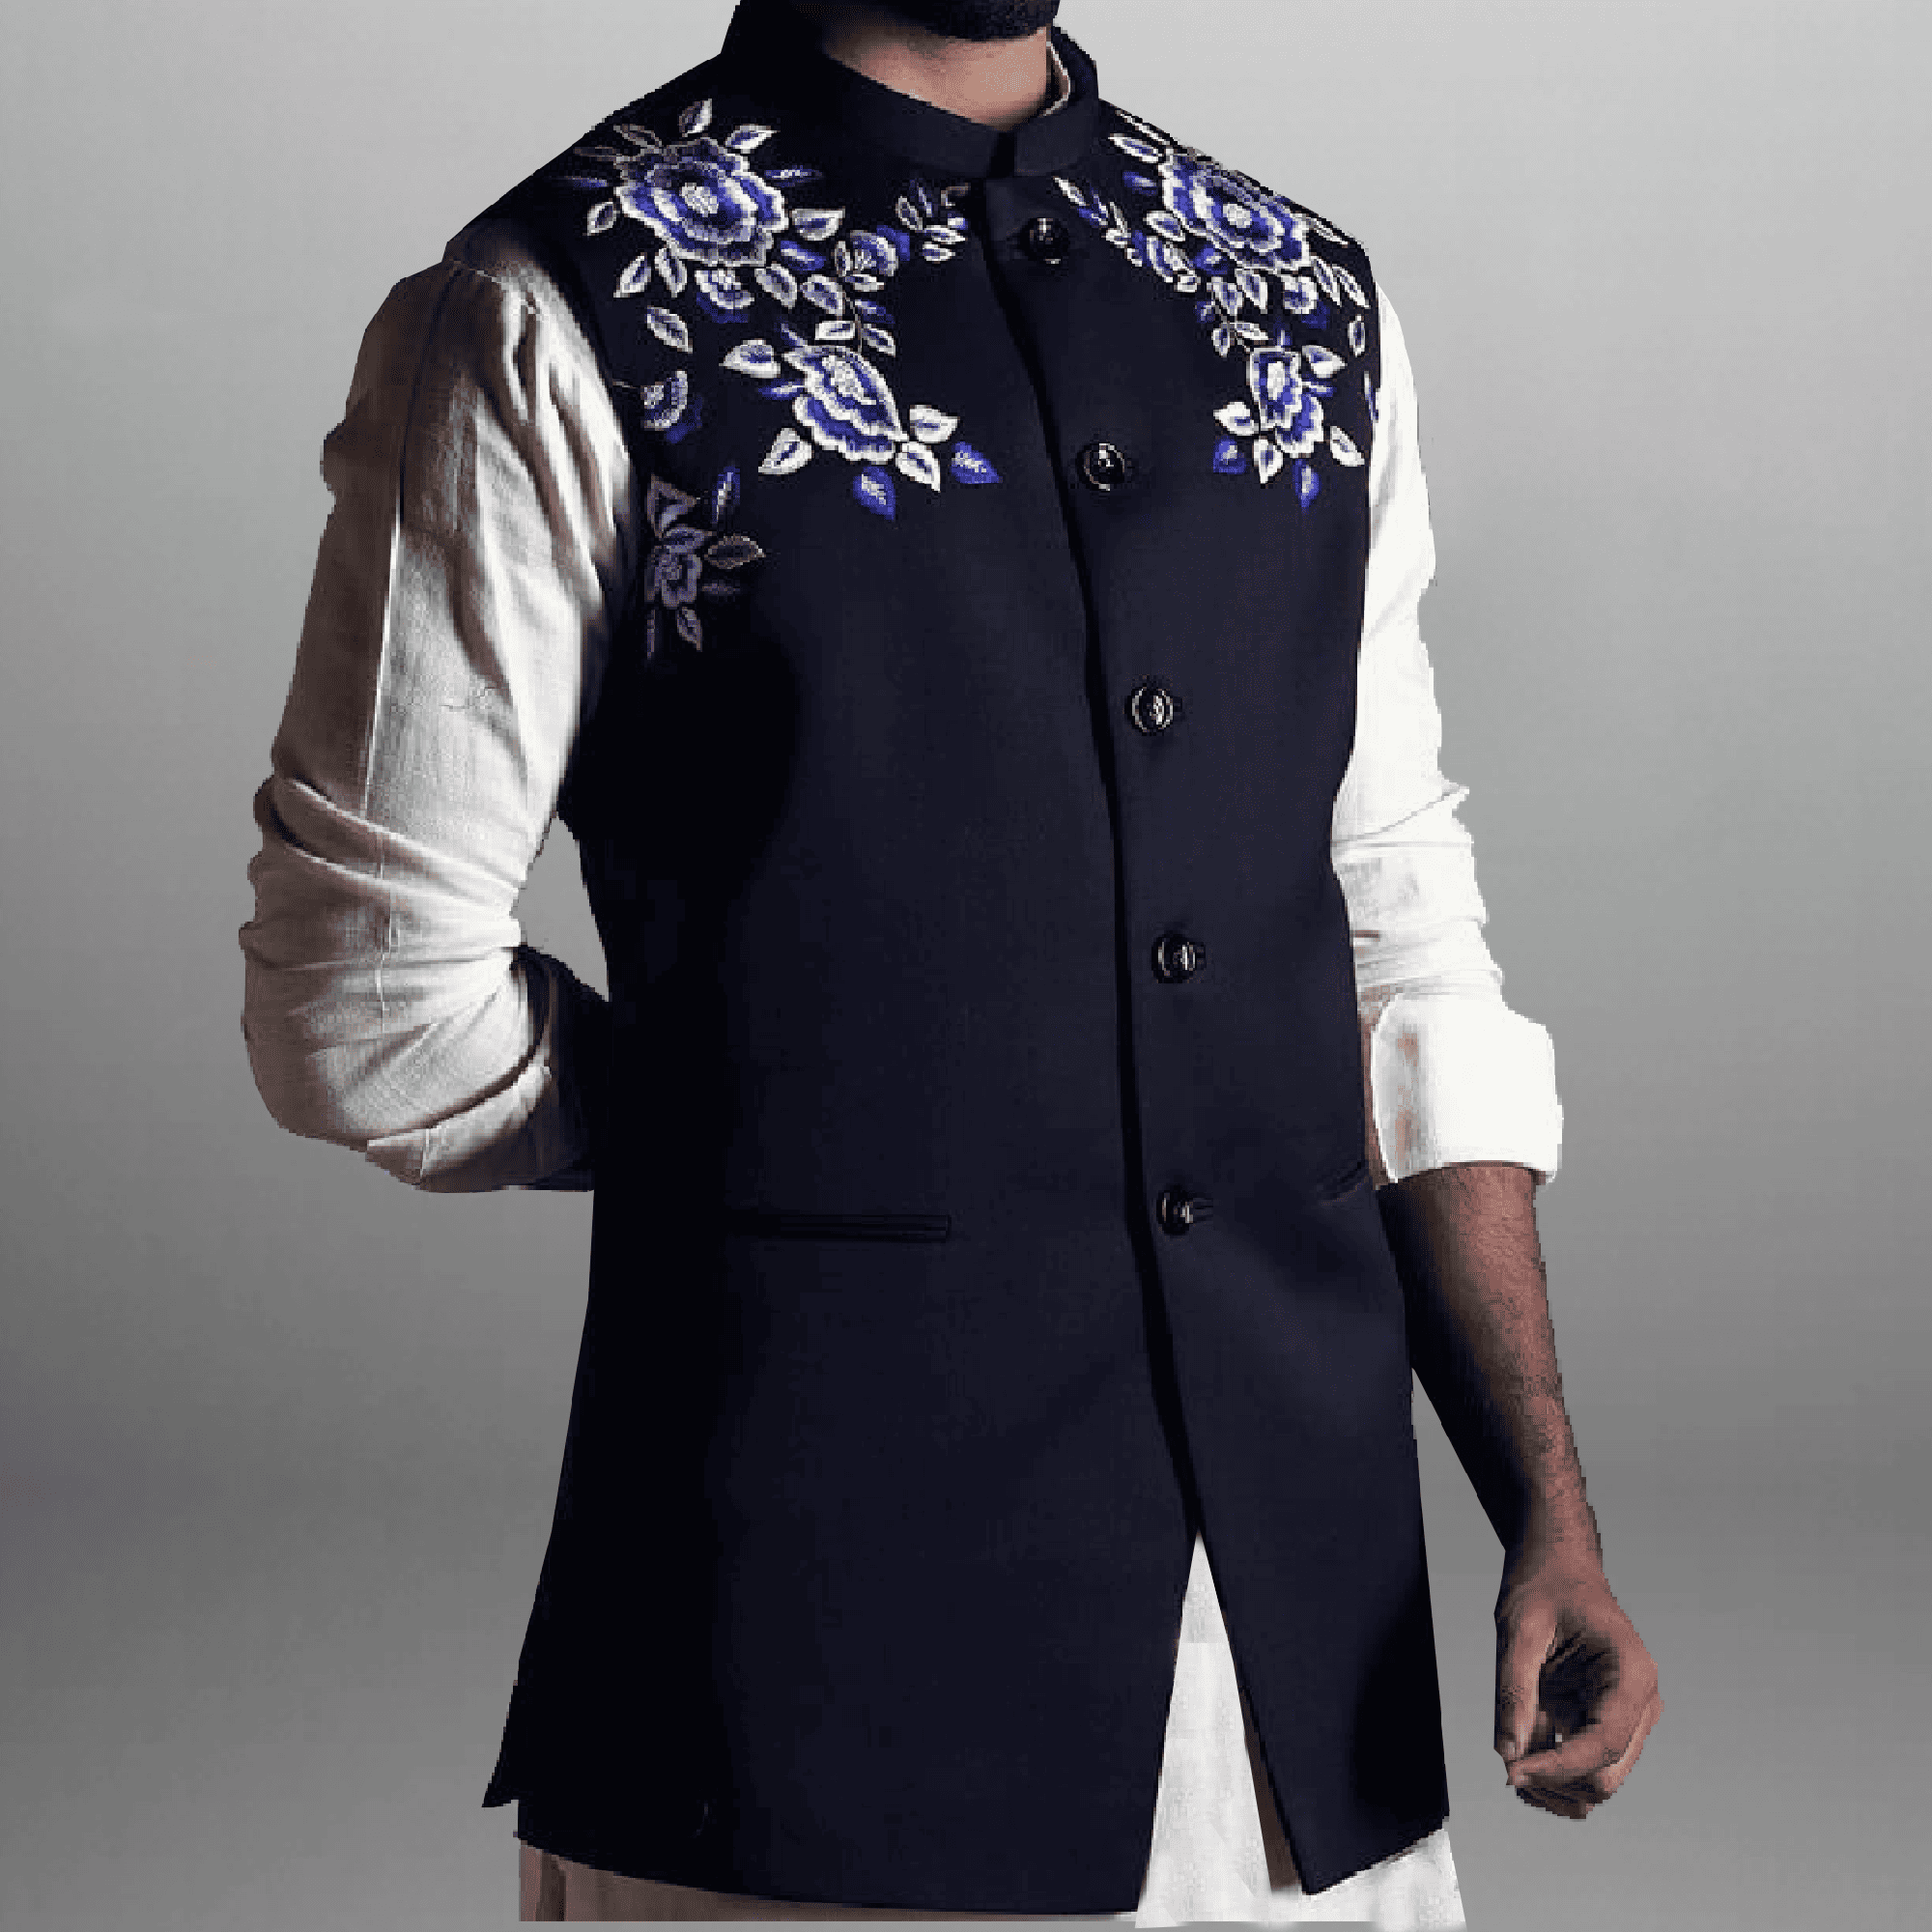 Men's Dark Blue waistcoat with Heavy embroidery on front-RMWC003